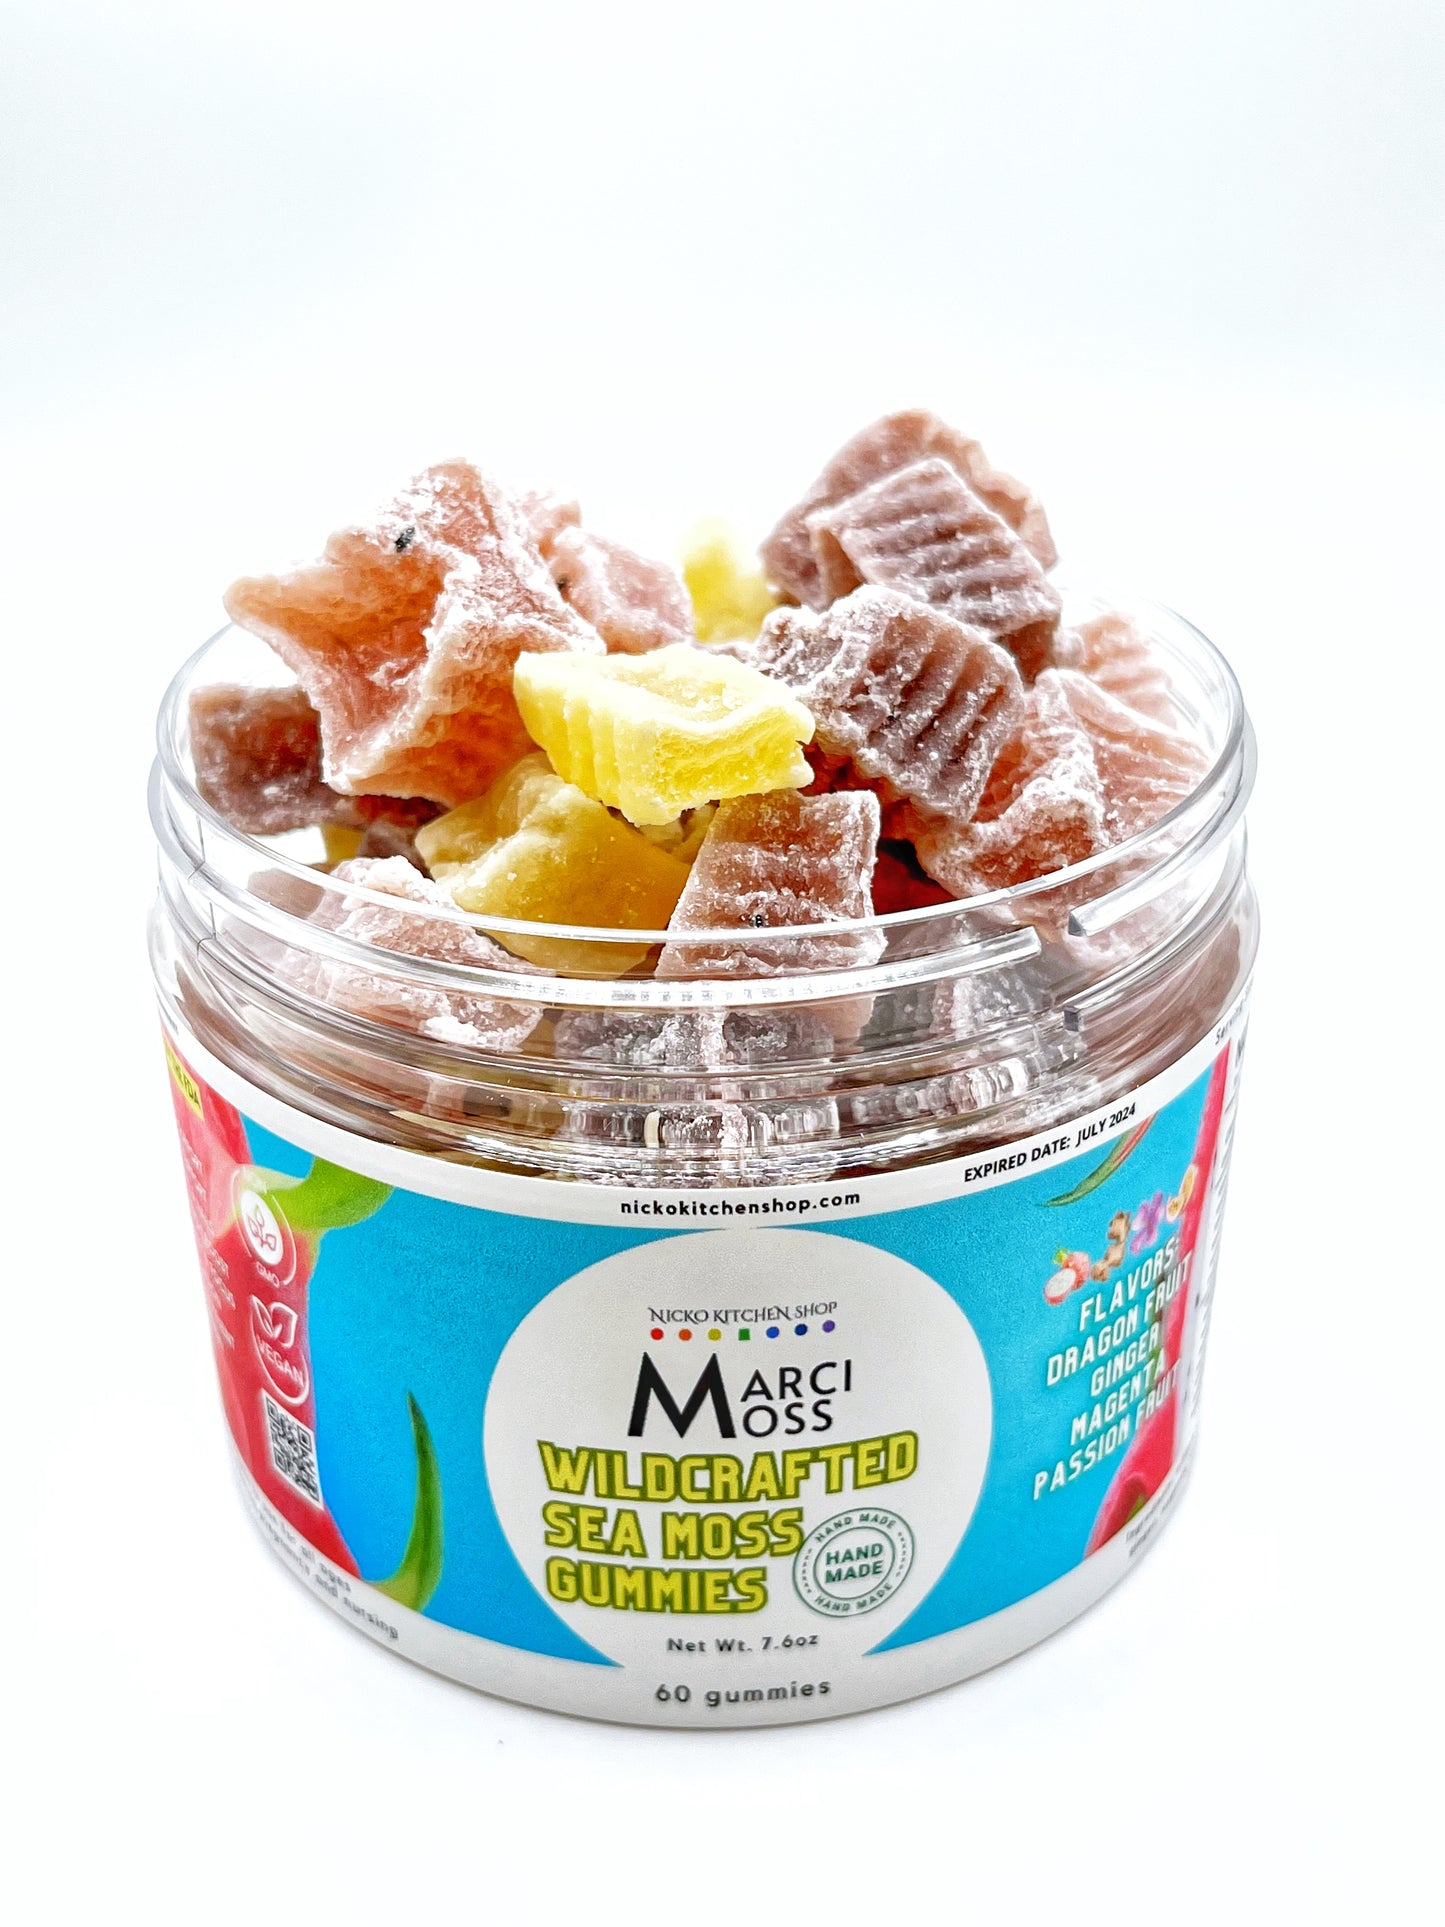 Sea Moss Gummies | Wildcrafted | Recurring Delivery